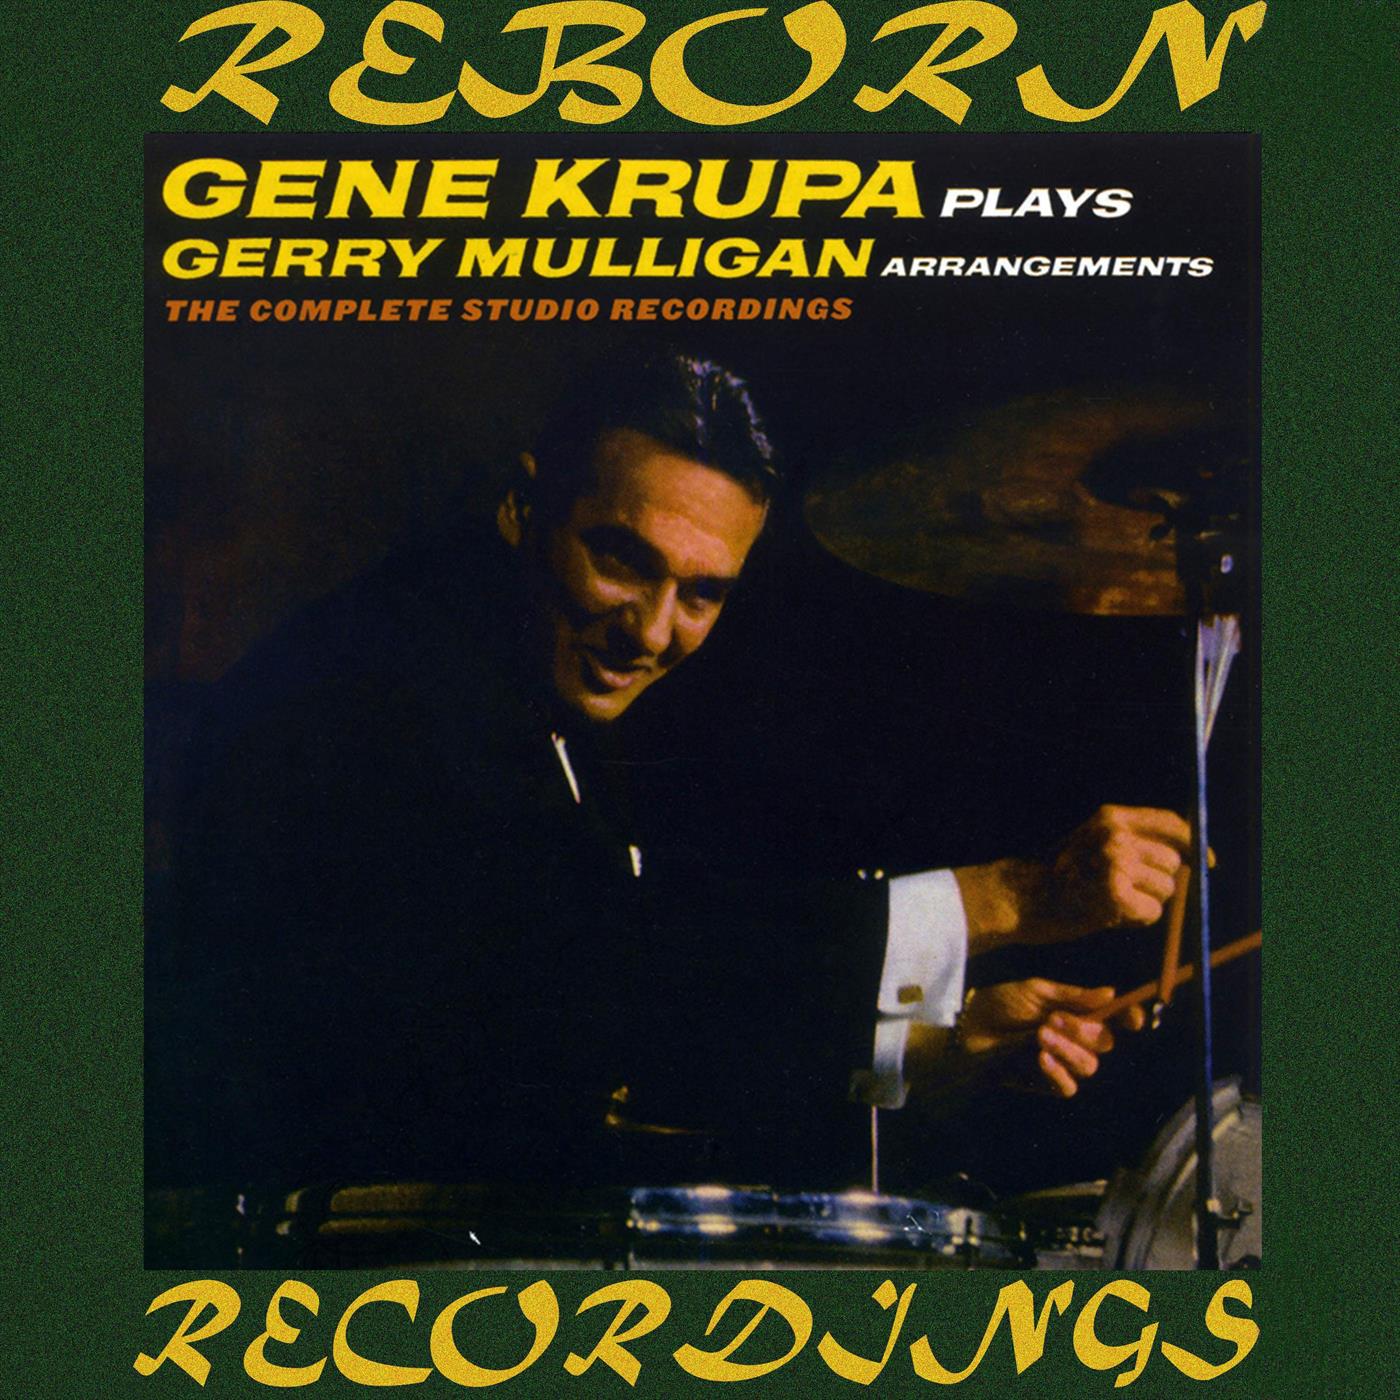 Gene Krupa plays Gerry Mulligan Arrangements, The Complete Studio Recordings (Expanded,HD Remastered)